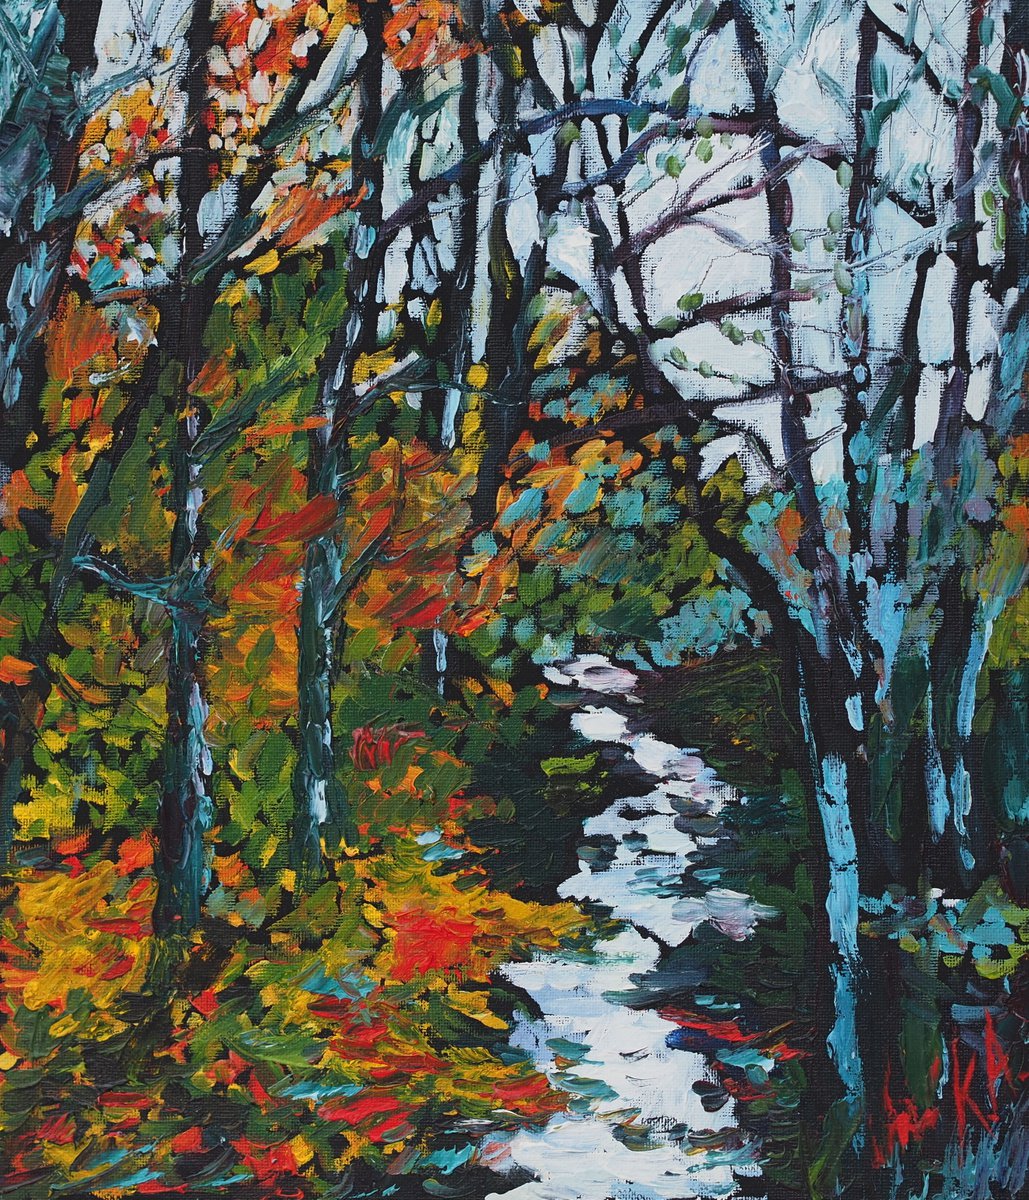 Little river in the autumn forest by Alfia Koral